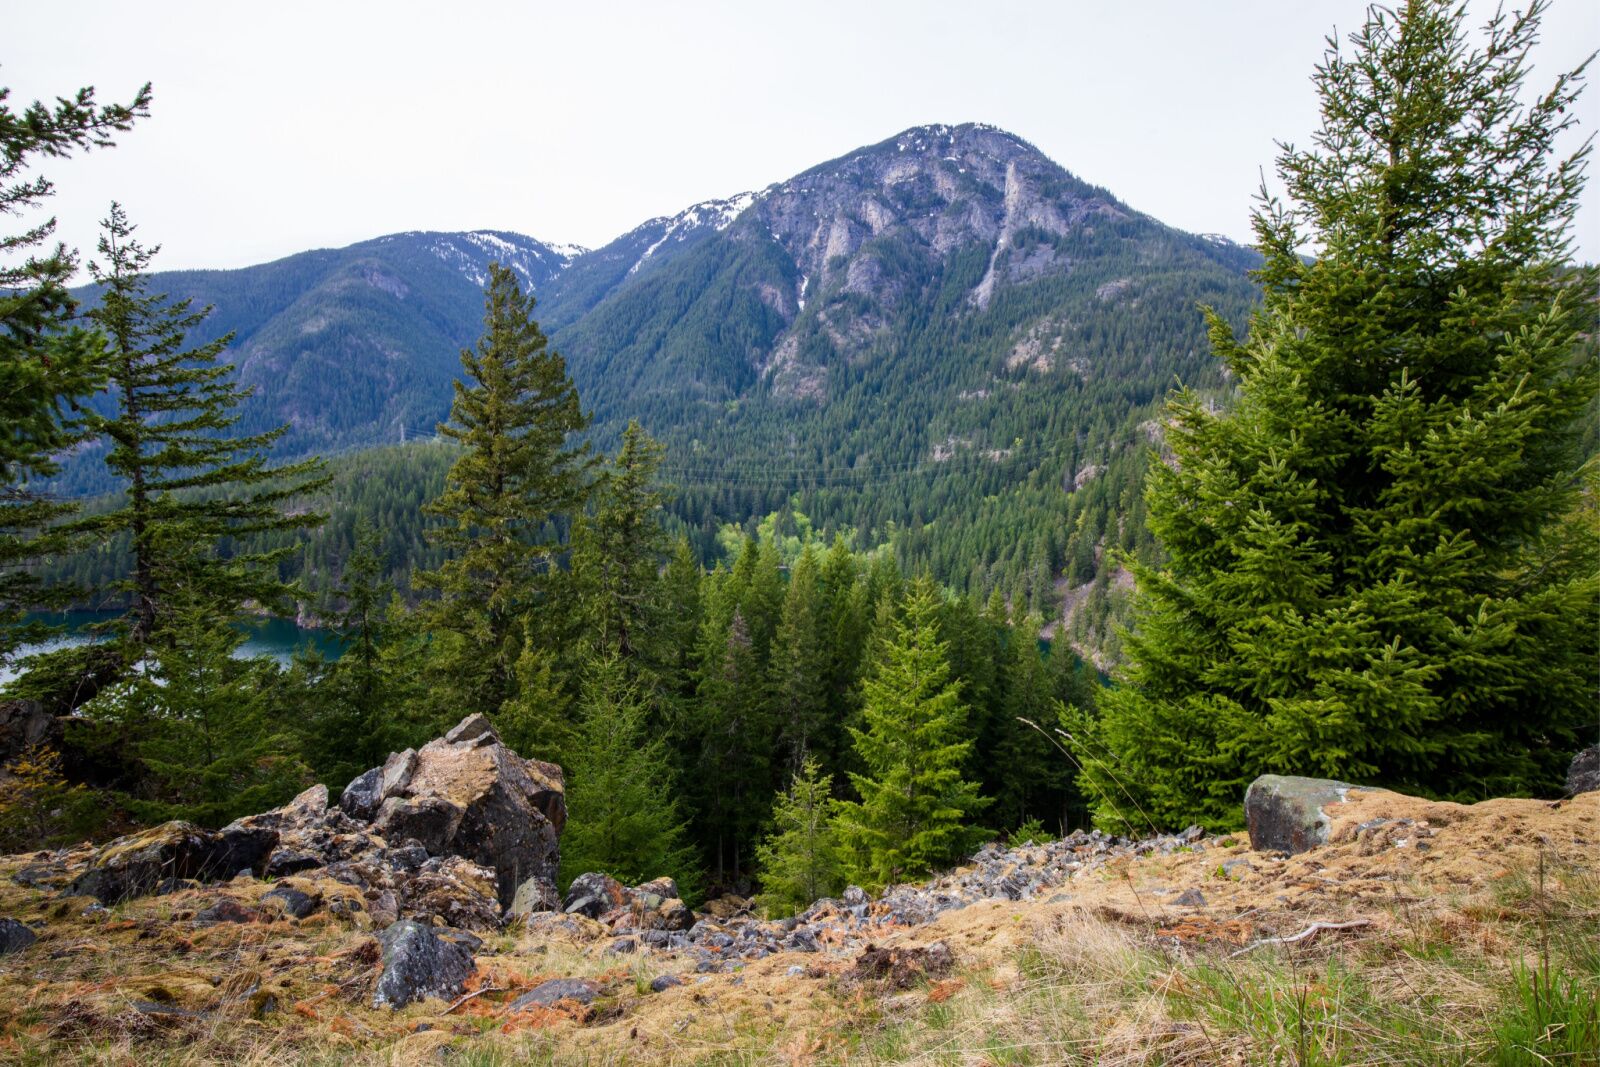 The view from the top of the longer Ross Dam trail in North Cascades National Park